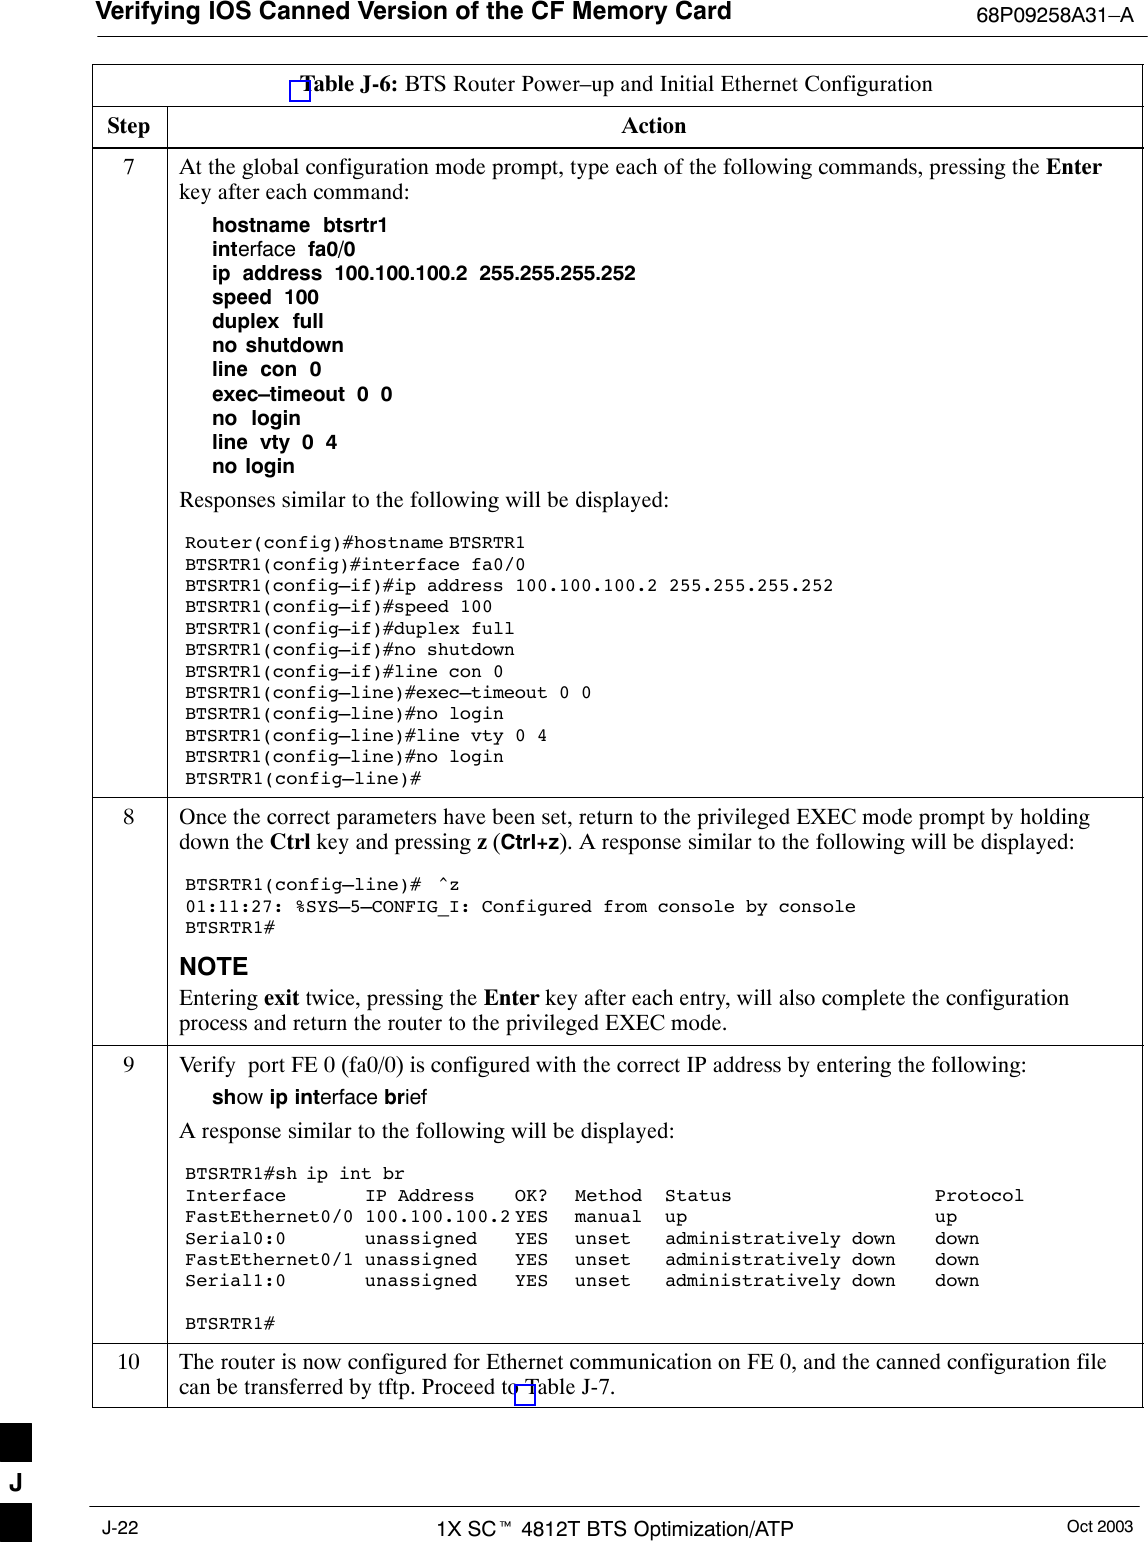 Verifying IOS Canned Version of the CF Memory Card 68P09258A31–AOct 20031X SCt 4812T BTS Optimization/ATPJ-22Table J-6: BTS Router Power–up and Initial Ethernet ConfigurationStep Action7At the global configuration mode prompt, type each of the following commands, pressing the Enterkey after each command:hostname  btsrtr1interface  fa0/0ip  address  100.100.100.2  255.255.255.252speed  100duplex  fullno shutdownline  con  0exec–timeout  0  0no  loginline  vty  0  4no loginResponses similar to the following will be displayed:Router(config)#hostname BTSRTR1BTSRTR1(config)#interface fa0/0BTSRTR1(config–if)#ip address 100.100.100.2 255.255.255.252BTSRTR1(config–if)#speed 100BTSRTR1(config–if)#duplex fullBTSRTR1(config–if)#no shutdownBTSRTR1(config–if)#line con 0BTSRTR1(config–line)#exec–timeout 0 0BTSRTR1(config–line)#no loginBTSRTR1(config–line)#line vty 0 4BTSRTR1(config–line)#no loginBTSRTR1(config–line)#8Once the correct parameters have been set, return to the privileged EXEC mode prompt by holdingdown the Ctrl key and pressing z (Ctrl+z). A response similar to the following will be displayed:BTSRTR1(config–line)#  ^z01:11:27: %SYS–5–CONFIG_I: Configured from console by consoleBTSRTR1#NOTEEntering exit twice, pressing the Enter key after each entry, will also complete the configurationprocess and return the router to the privileged EXEC mode.9Verify  port FE 0 (fa0/0) is configured with the correct IP address by entering the following:show ip interface briefA response similar to the following will be displayed:BTSRTR1#sh ip int brInterface IP Address OK? Method Status ProtocolFastEthernet0/0 100.100.100.2 YES manual up upSerial0:0 unassigned YES unset administratively down downFastEthernet0/1 unassigned YES unset administratively down downSerial1:0 unassigned YES unset administratively down downBTSRTR1#10 The router is now configured for Ethernet communication on FE 0, and the canned configuration filecan be transferred by tftp. Proceed to Table J-7. J